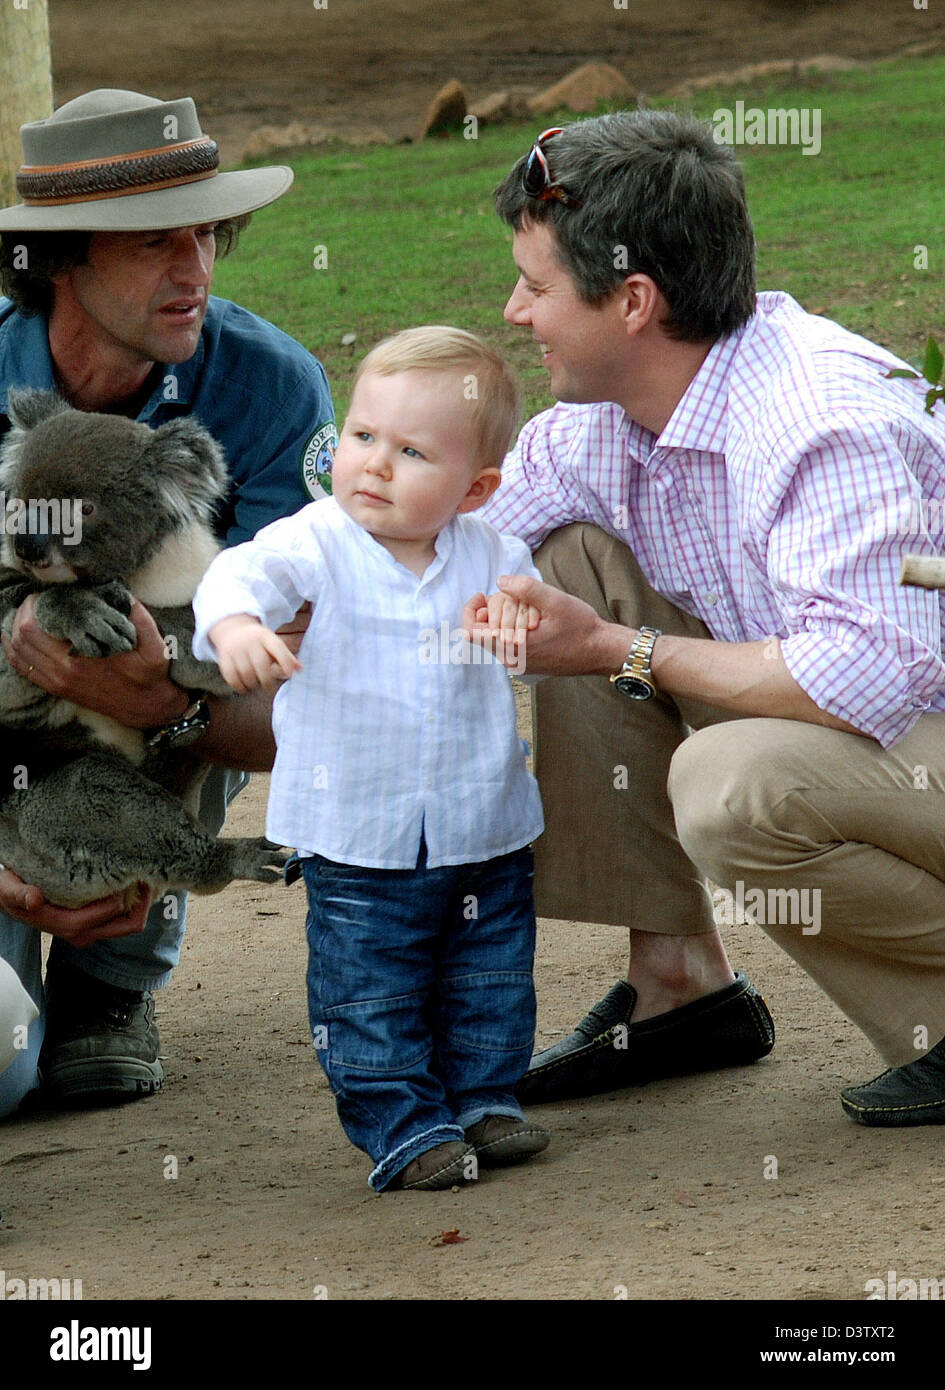 r-l-crown-prince-frederik-of-denmark-his-son-prince-christian-and-D3TXT2.jpg